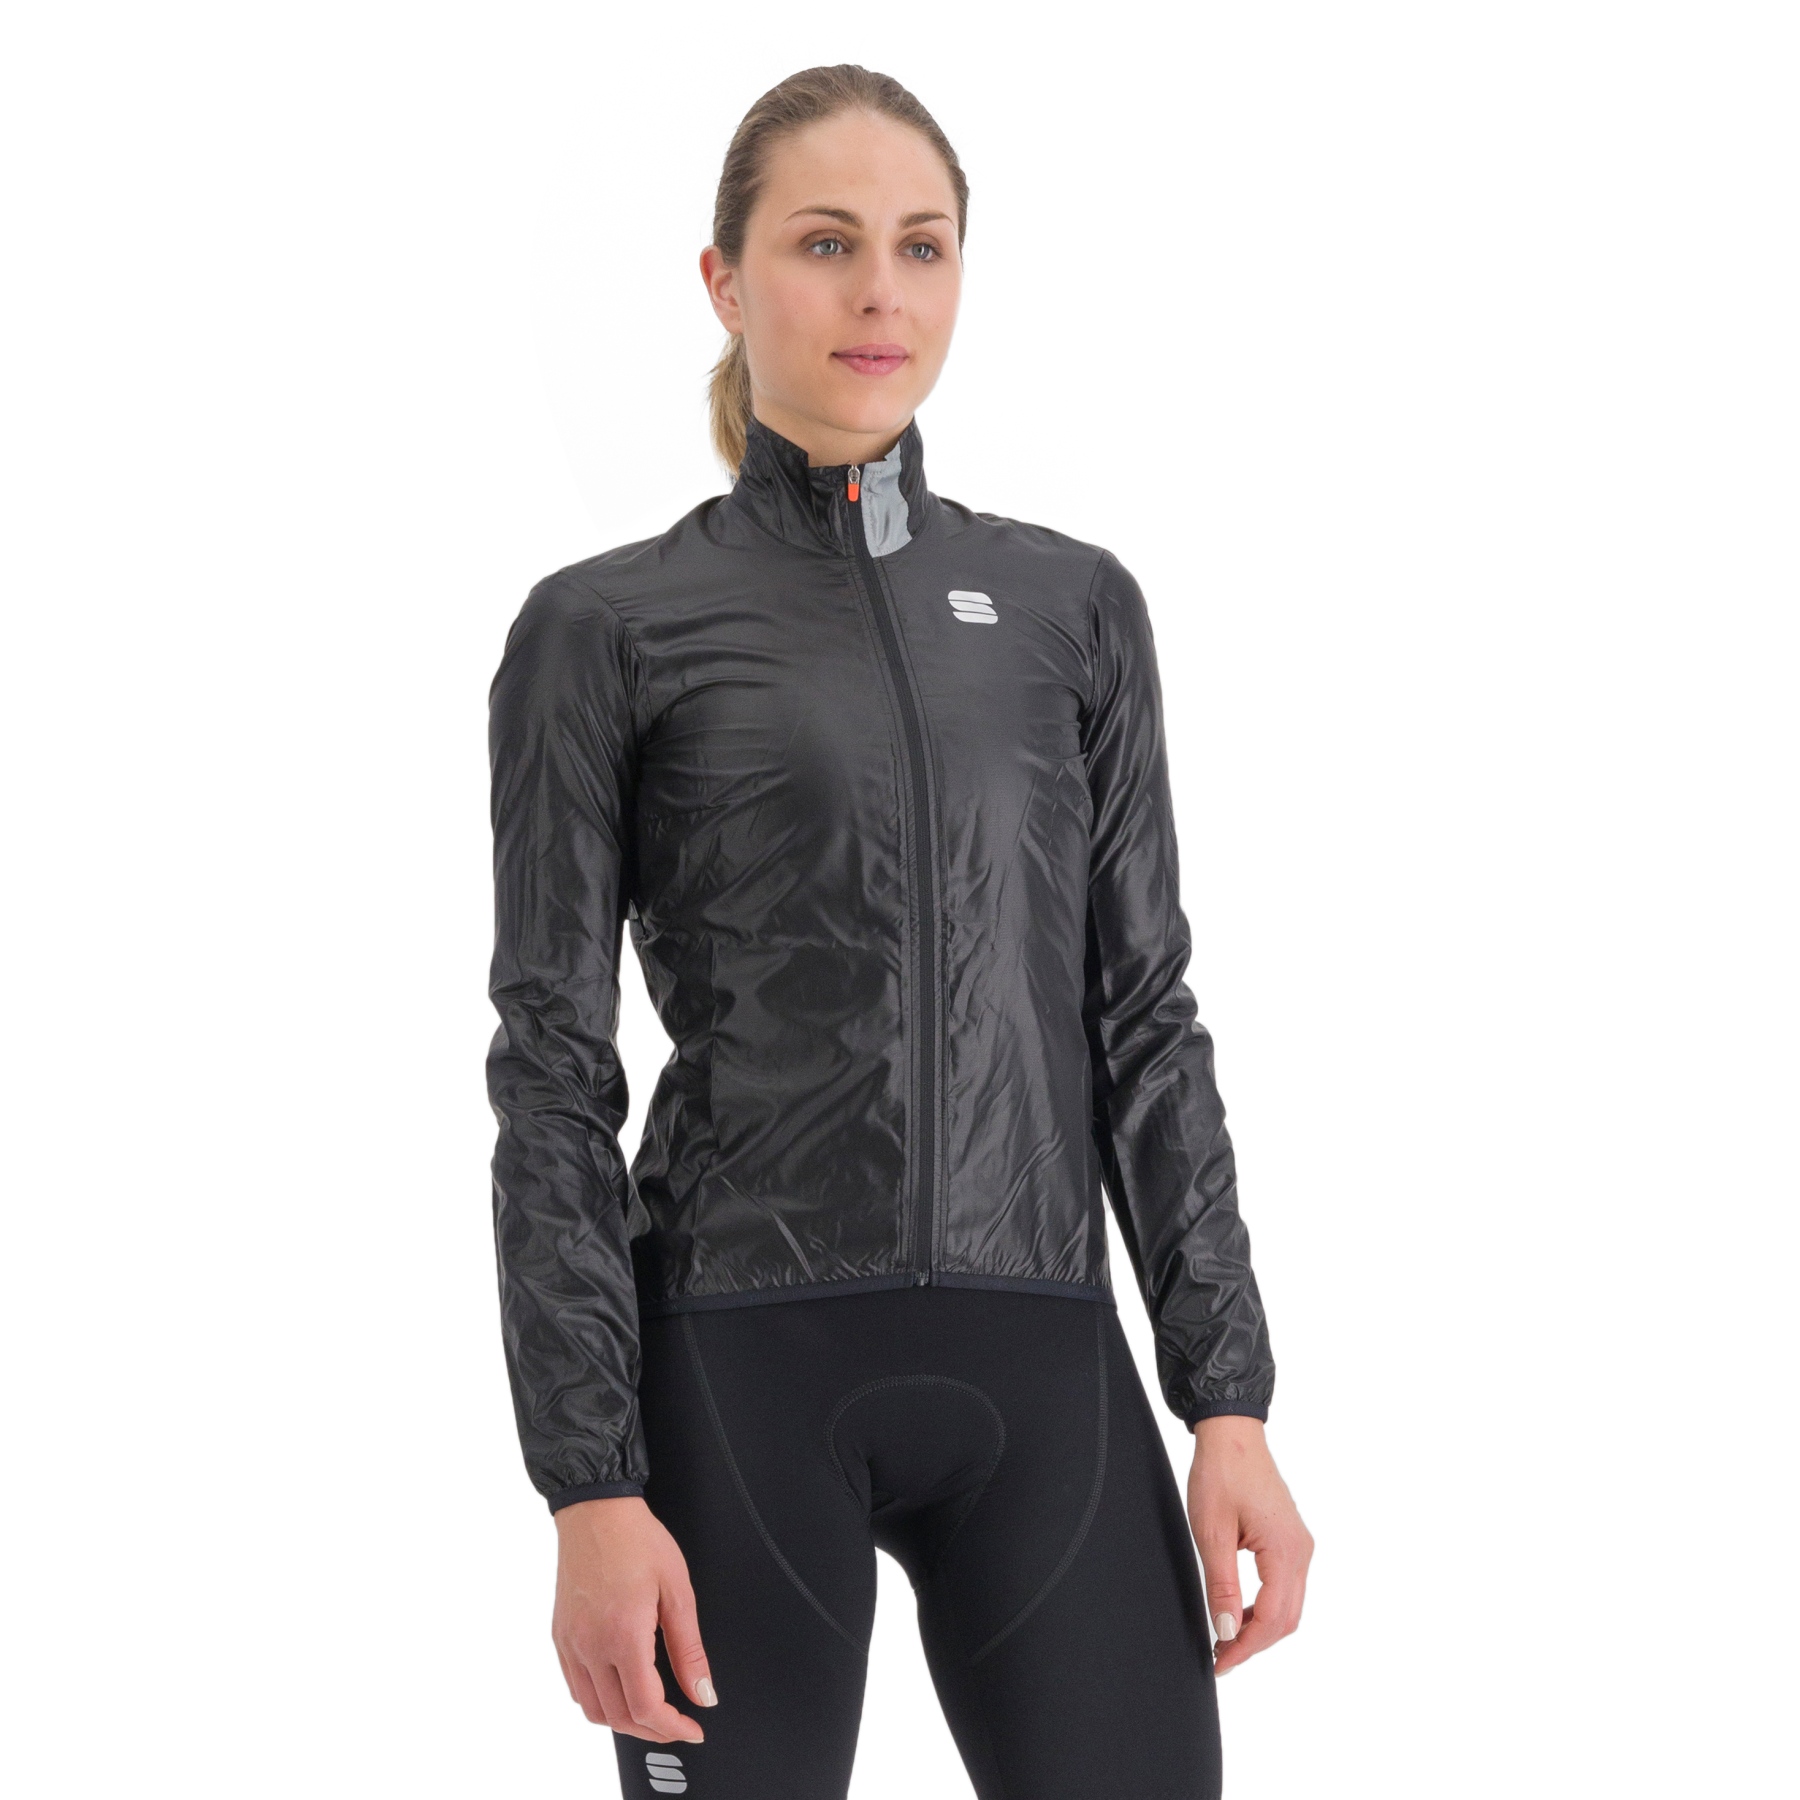 Picture of Sportful Hot Pack Easylight Women Jacket - 002 Black